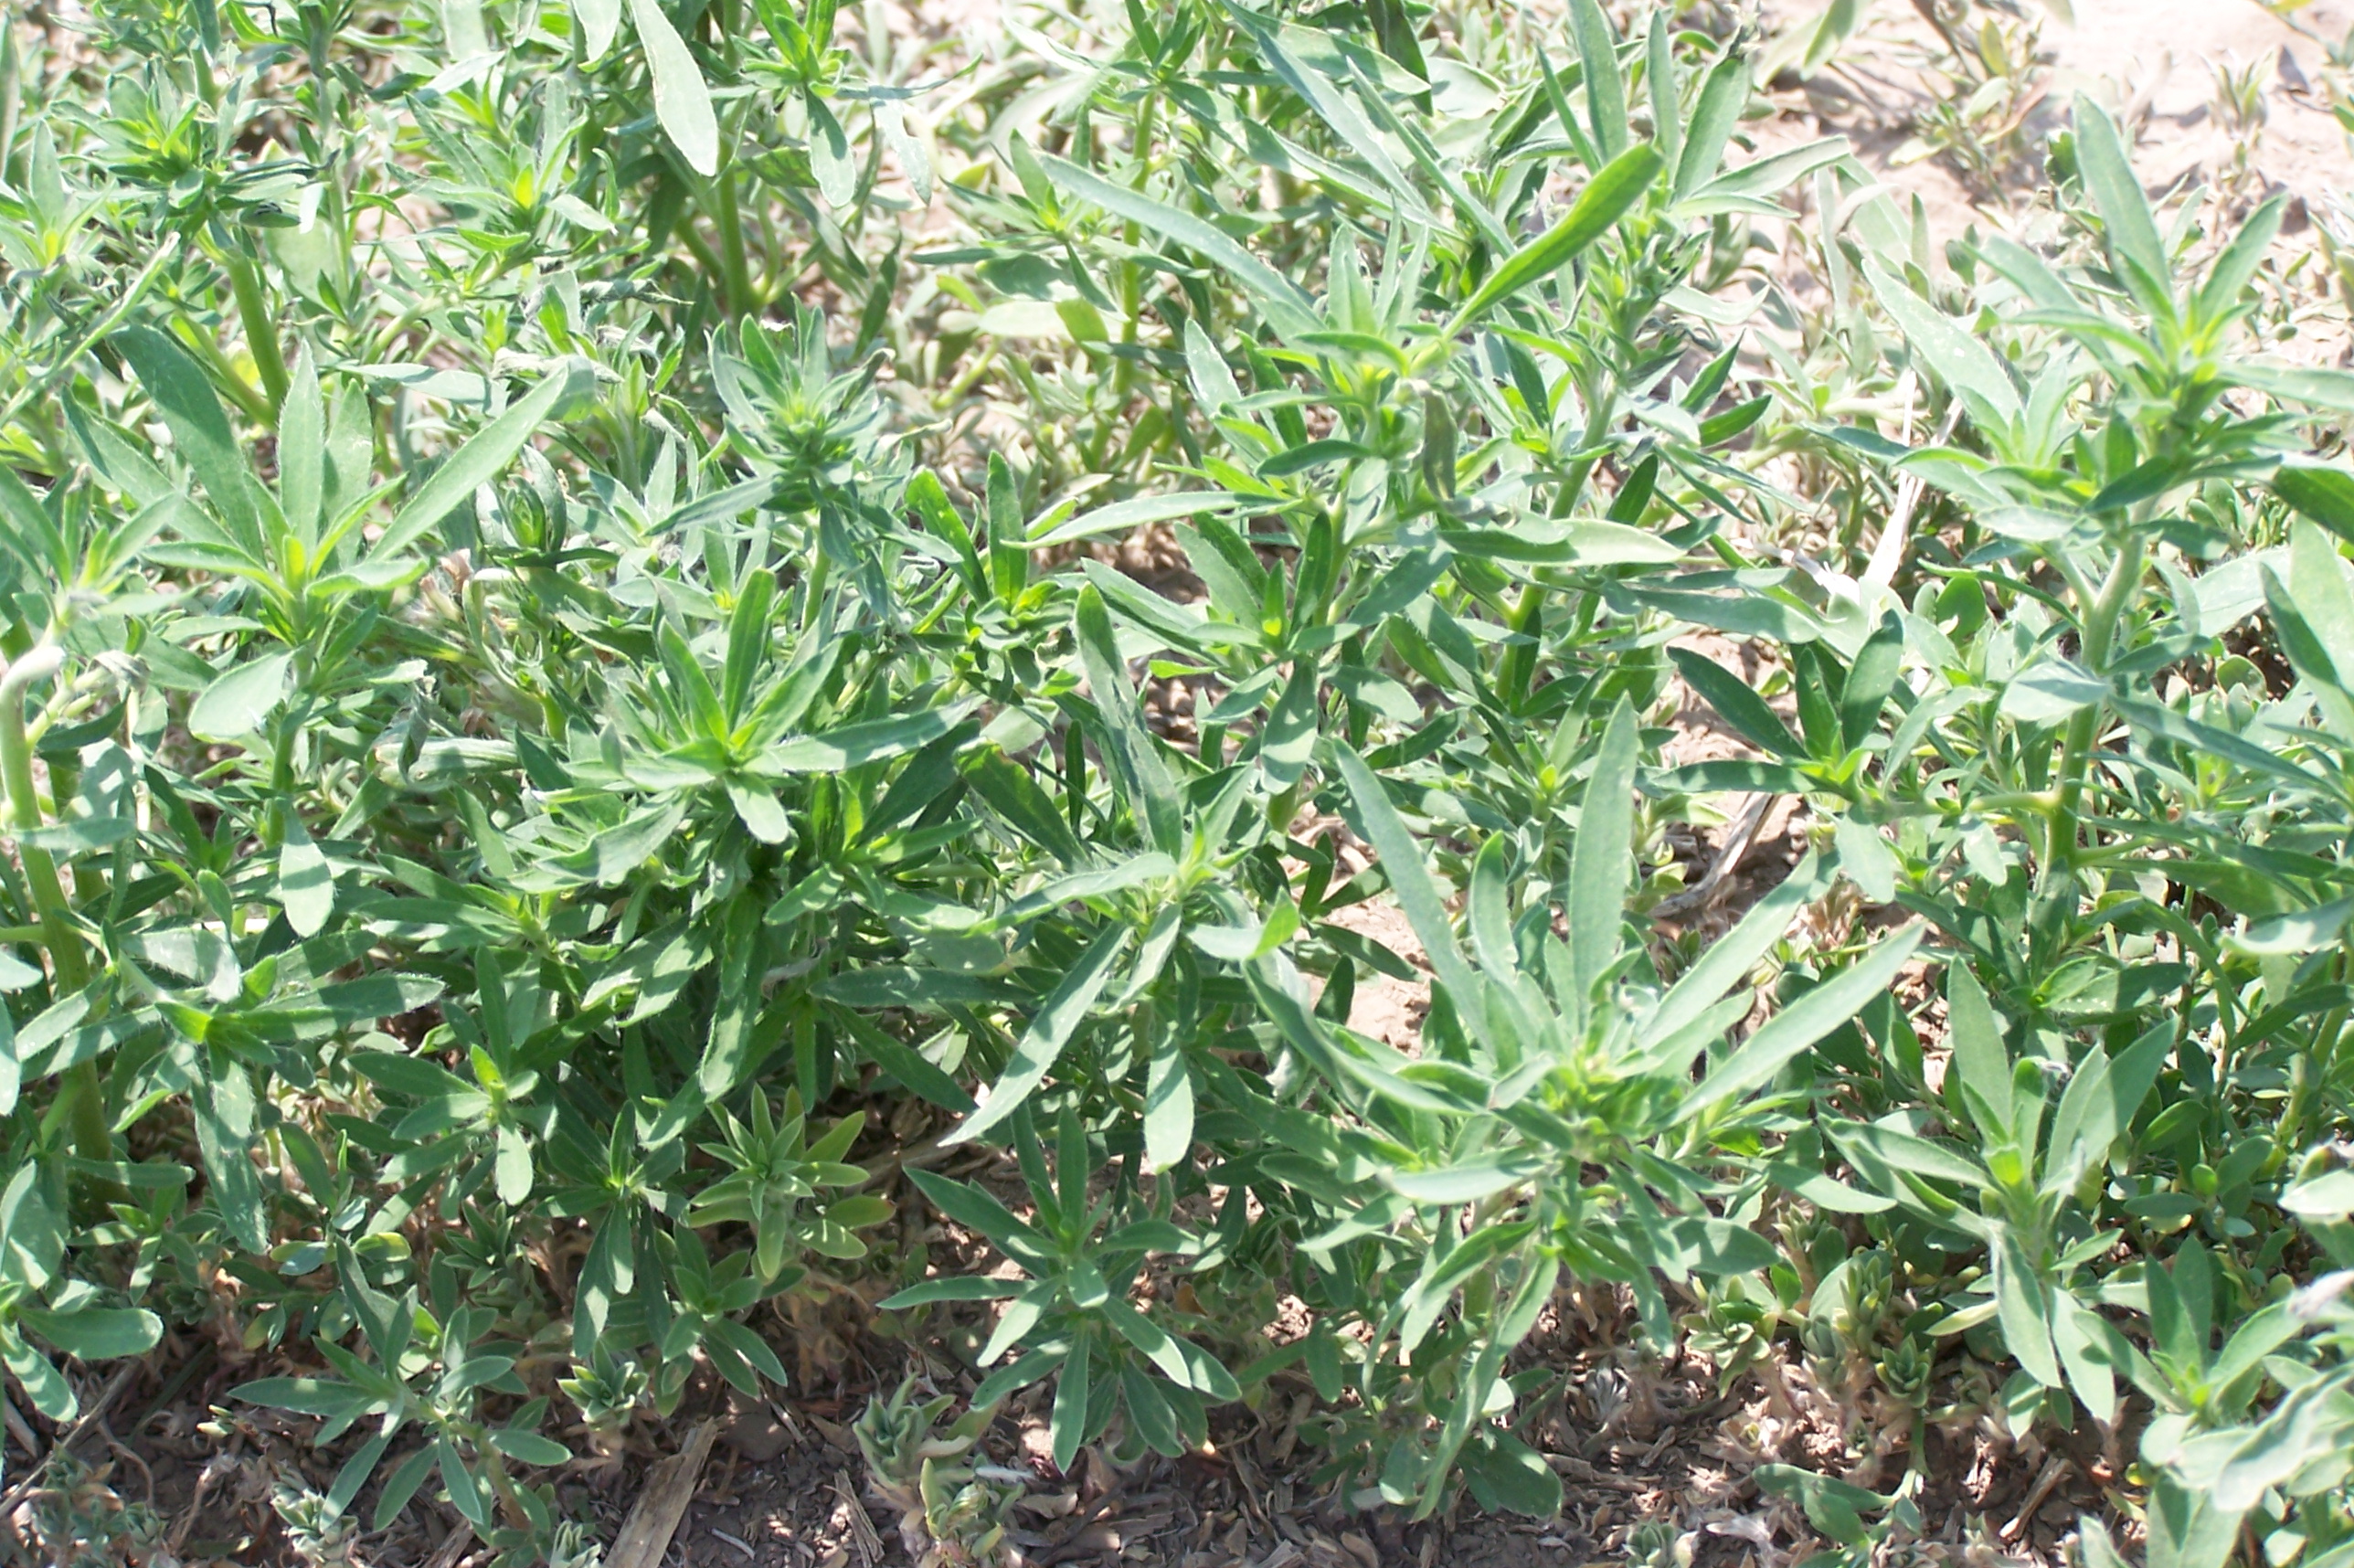 This agronomic photo shows the weed kochia.